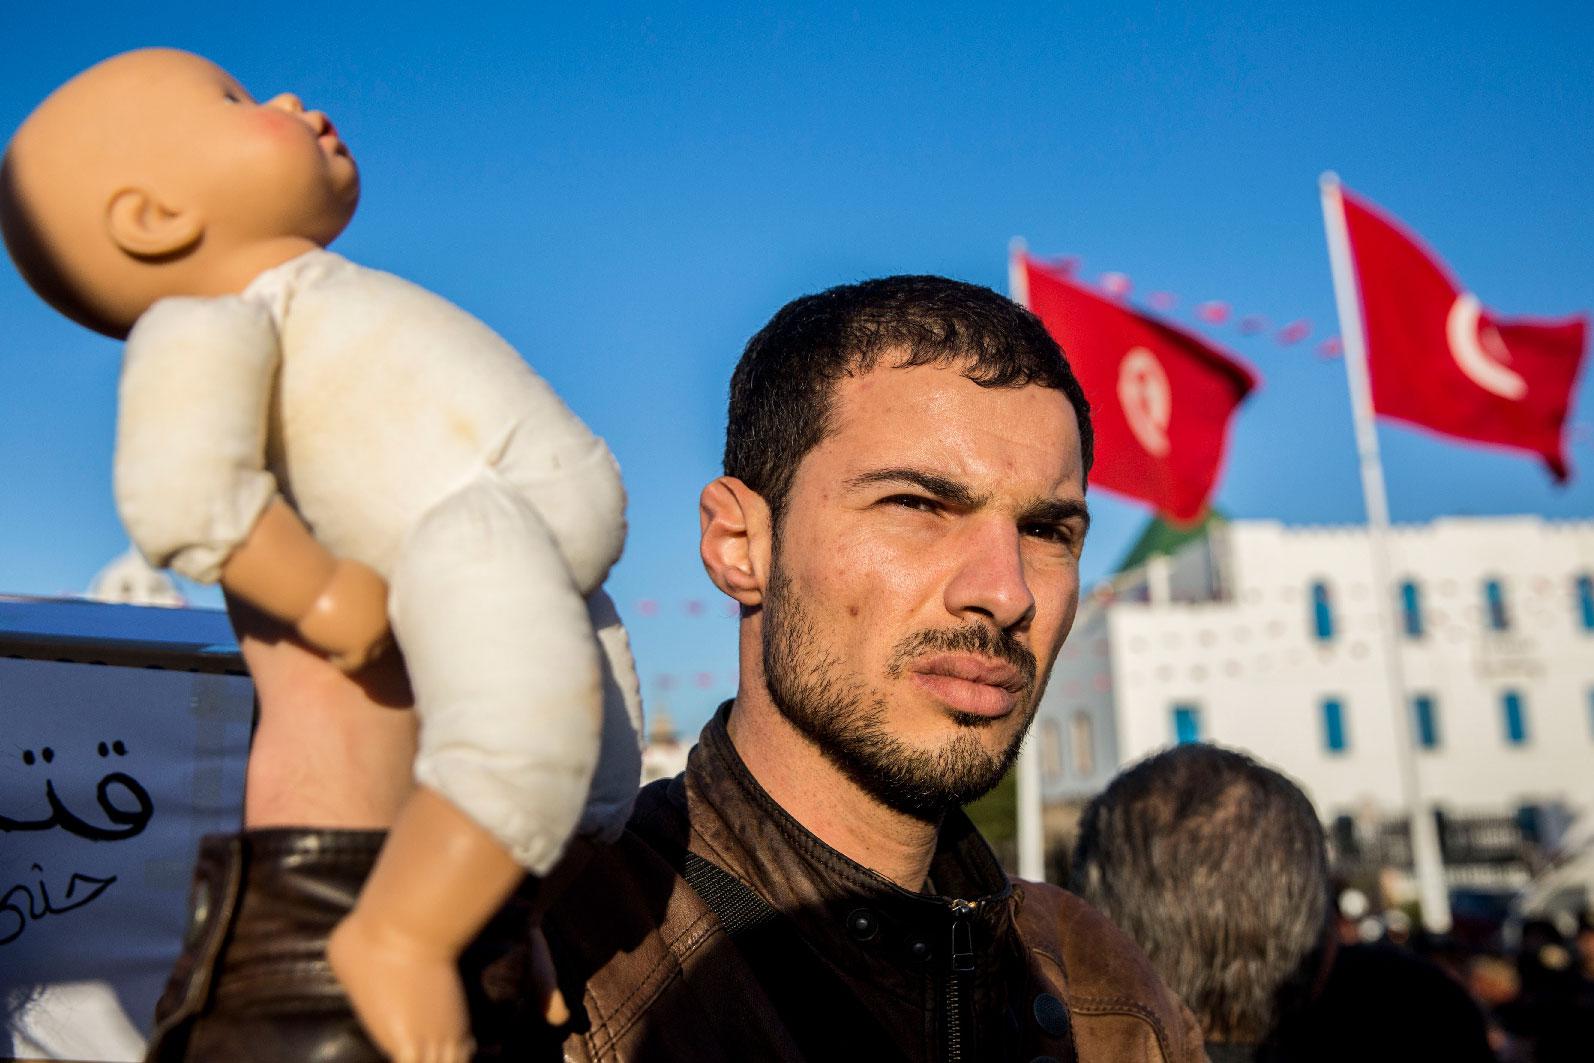 A Tunisian protester holds a baby doll in Tunis to denounce the deaths of babies in Tunisian hospital, Tuesday, March 12, 2019.